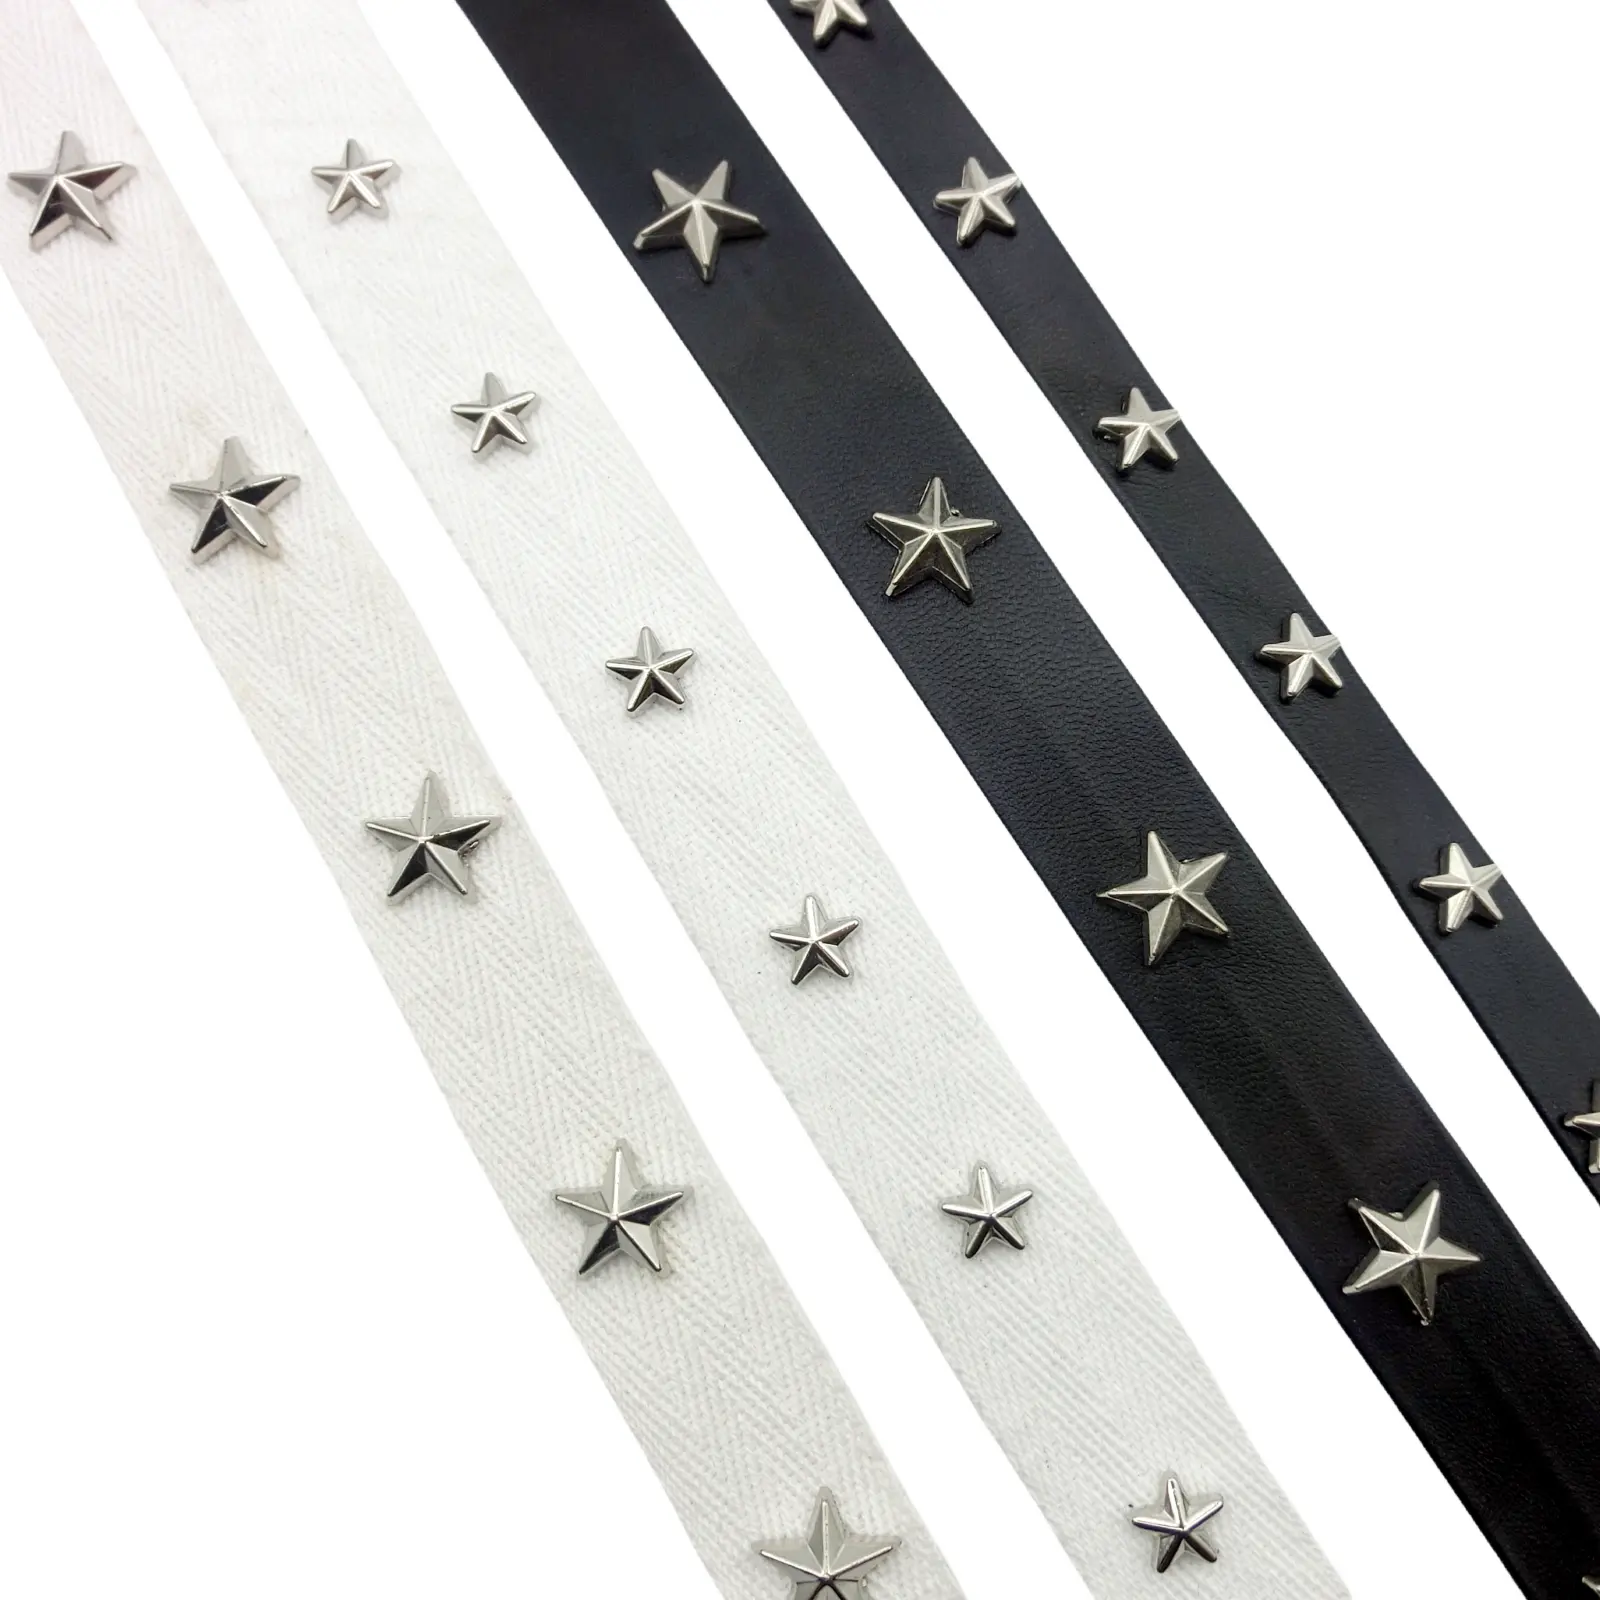 White Leather Strip The Punk Gothic Style Plastic star shape Rivet Tape for Clothing Accessories